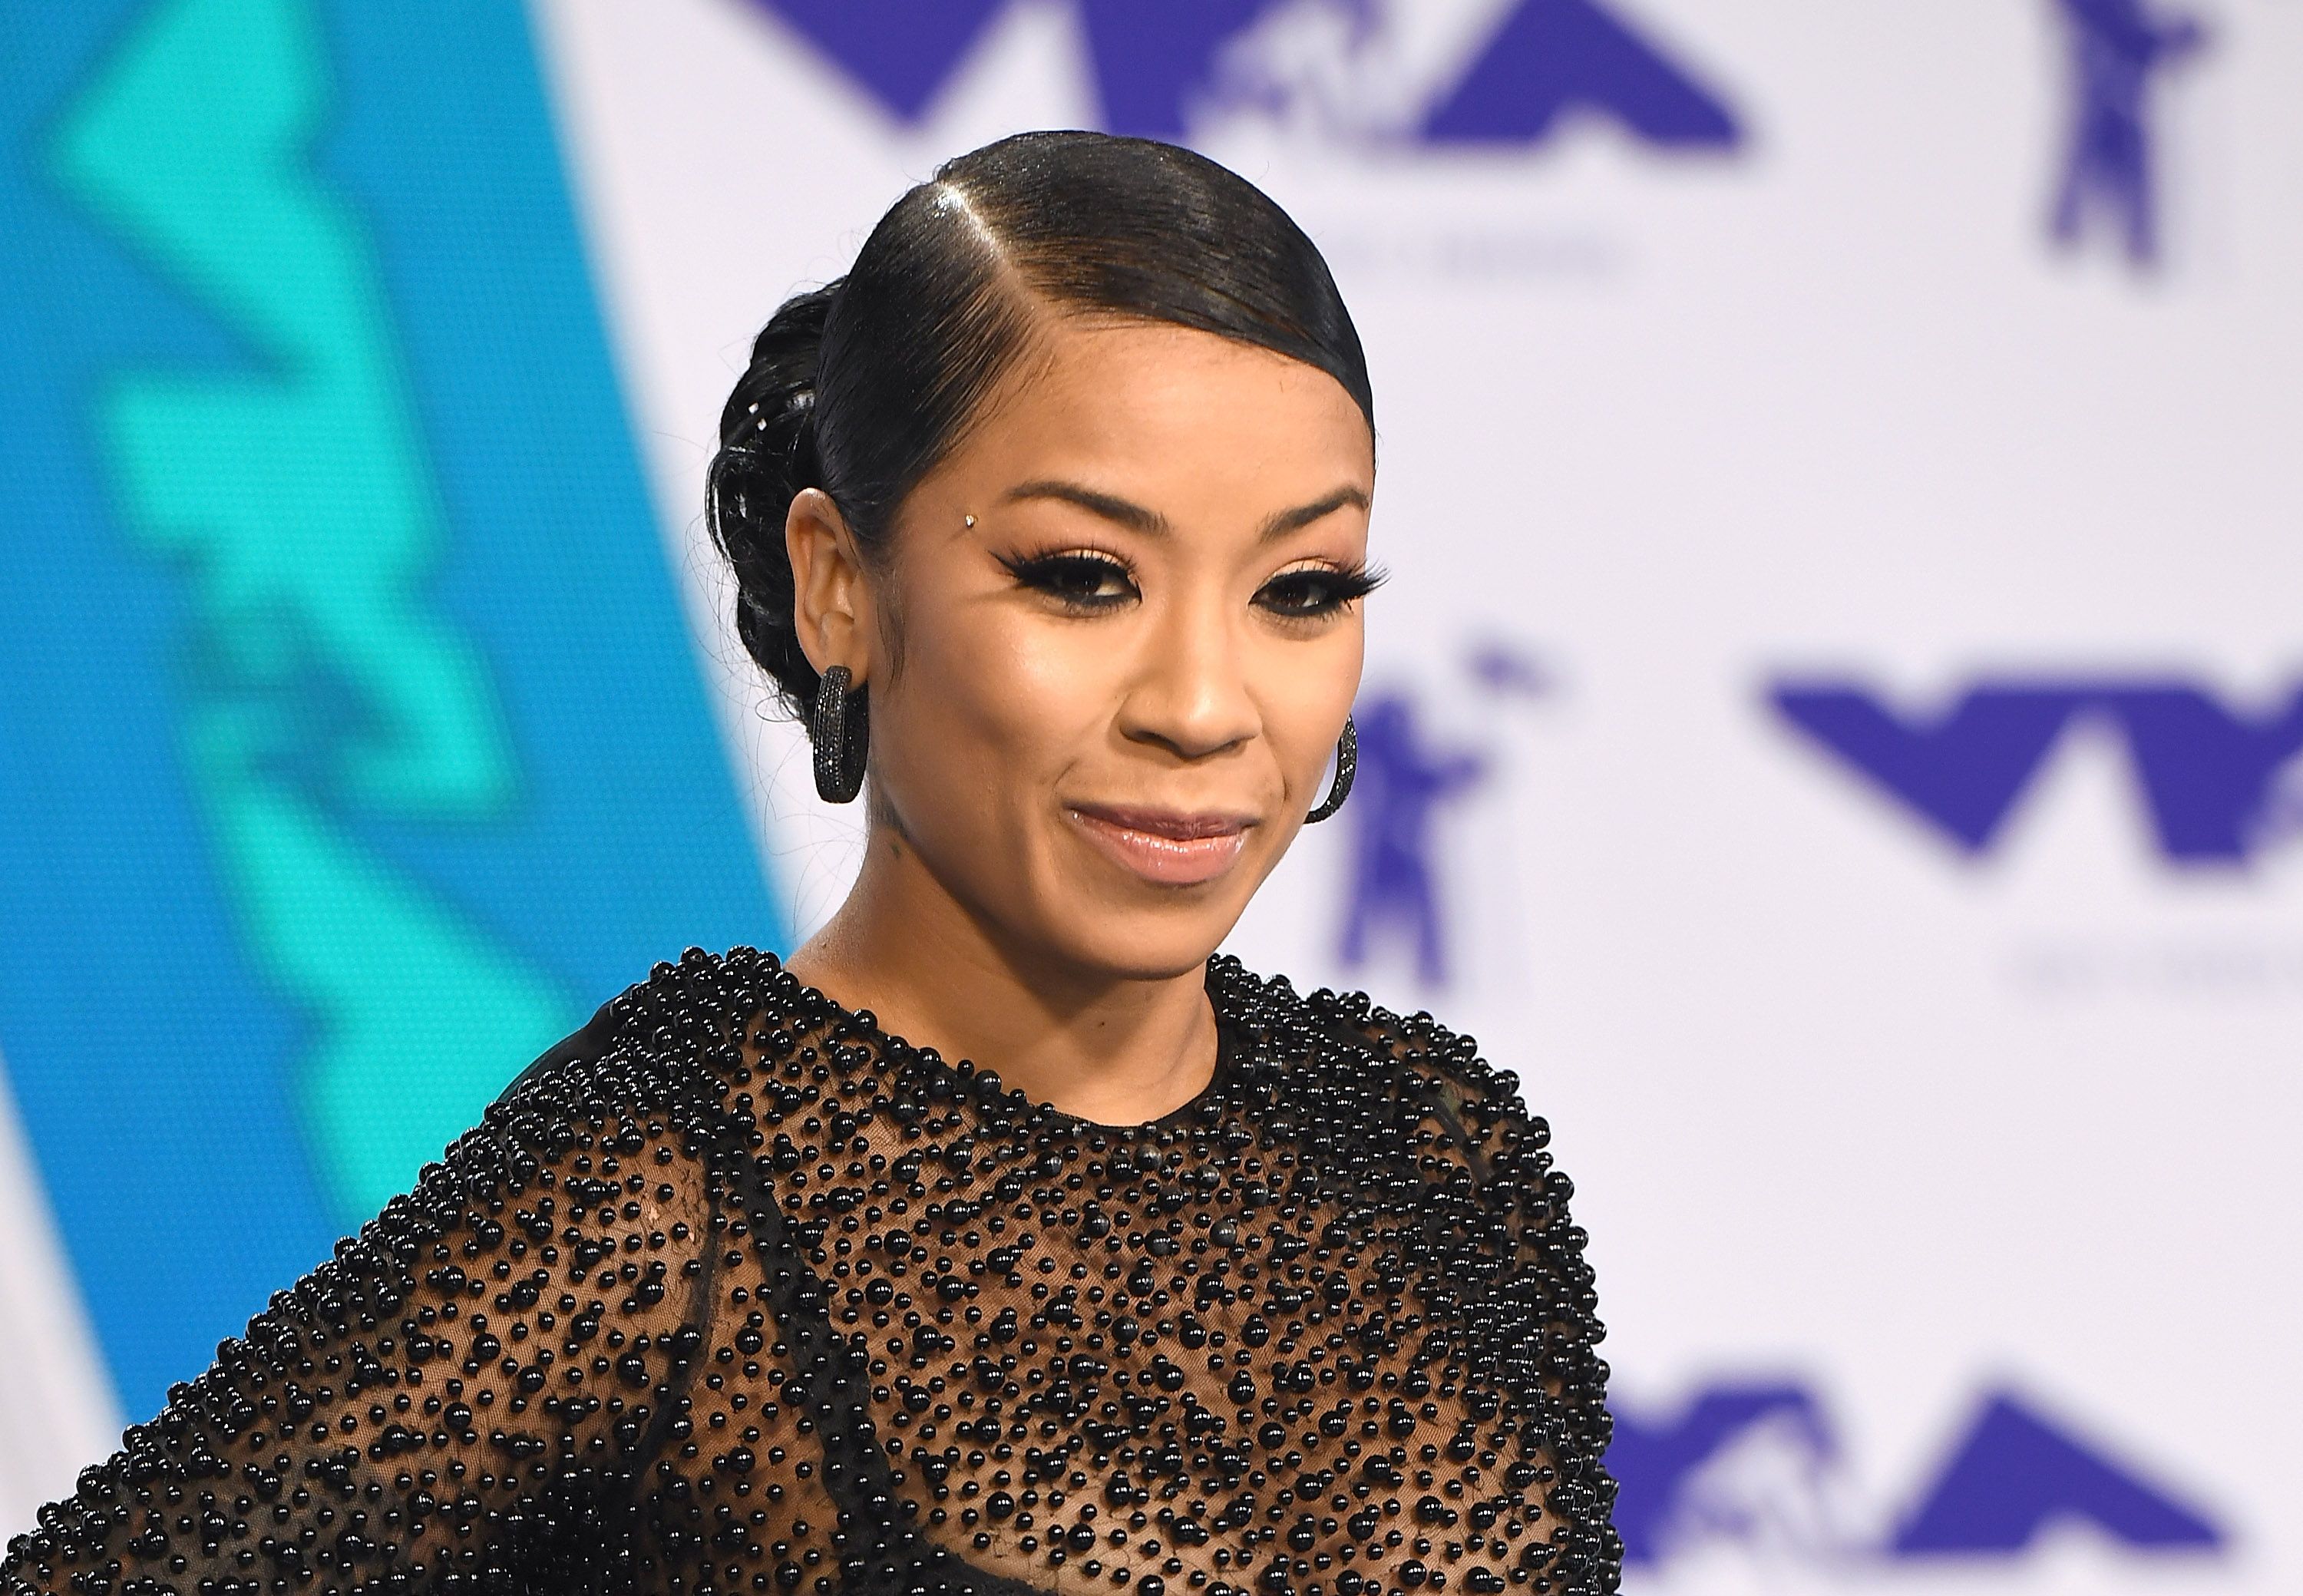 Singer Keyshia Cole at the MTV Video Music Awards on August 27, 2017 in California. | Photo: Getty Images